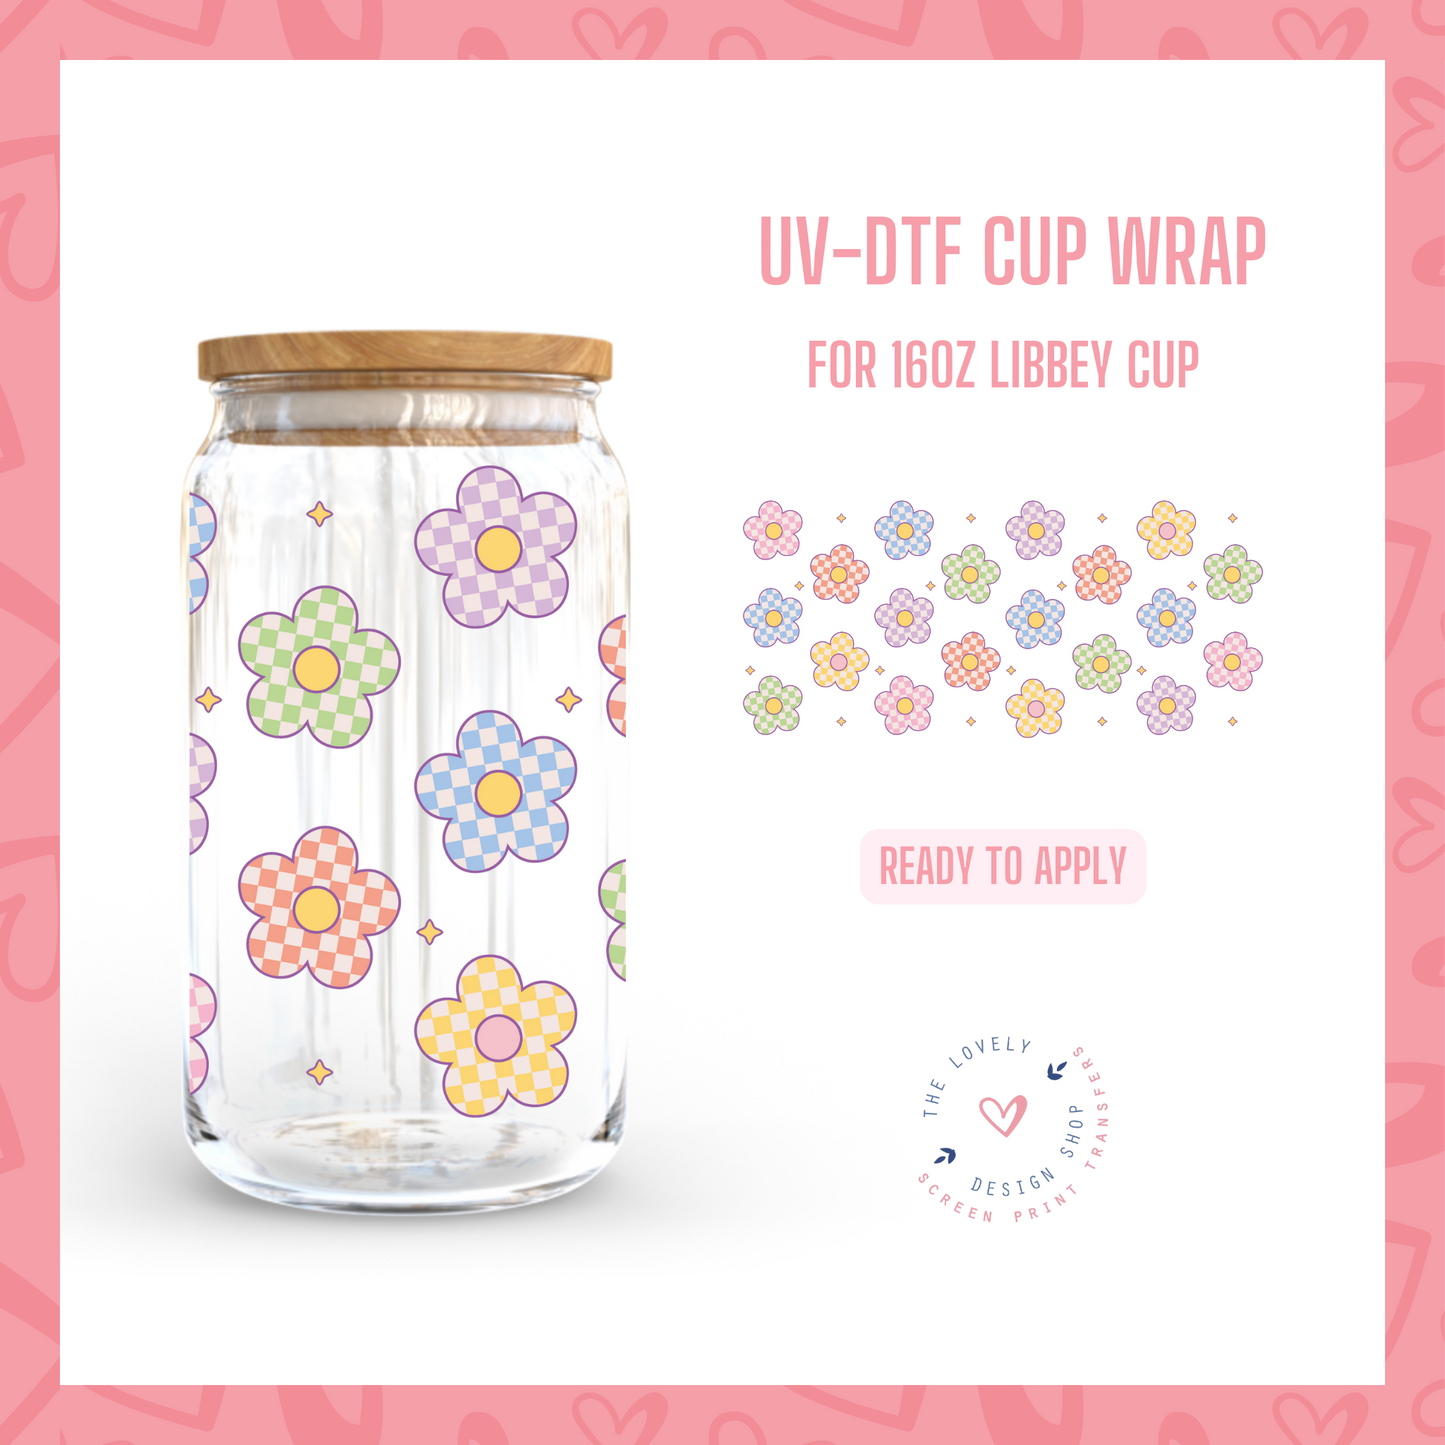 Checkered Colorful Daisy - UV DTF 16 oz Libbey Cup Wrap (Ready to Ship) Apr 22